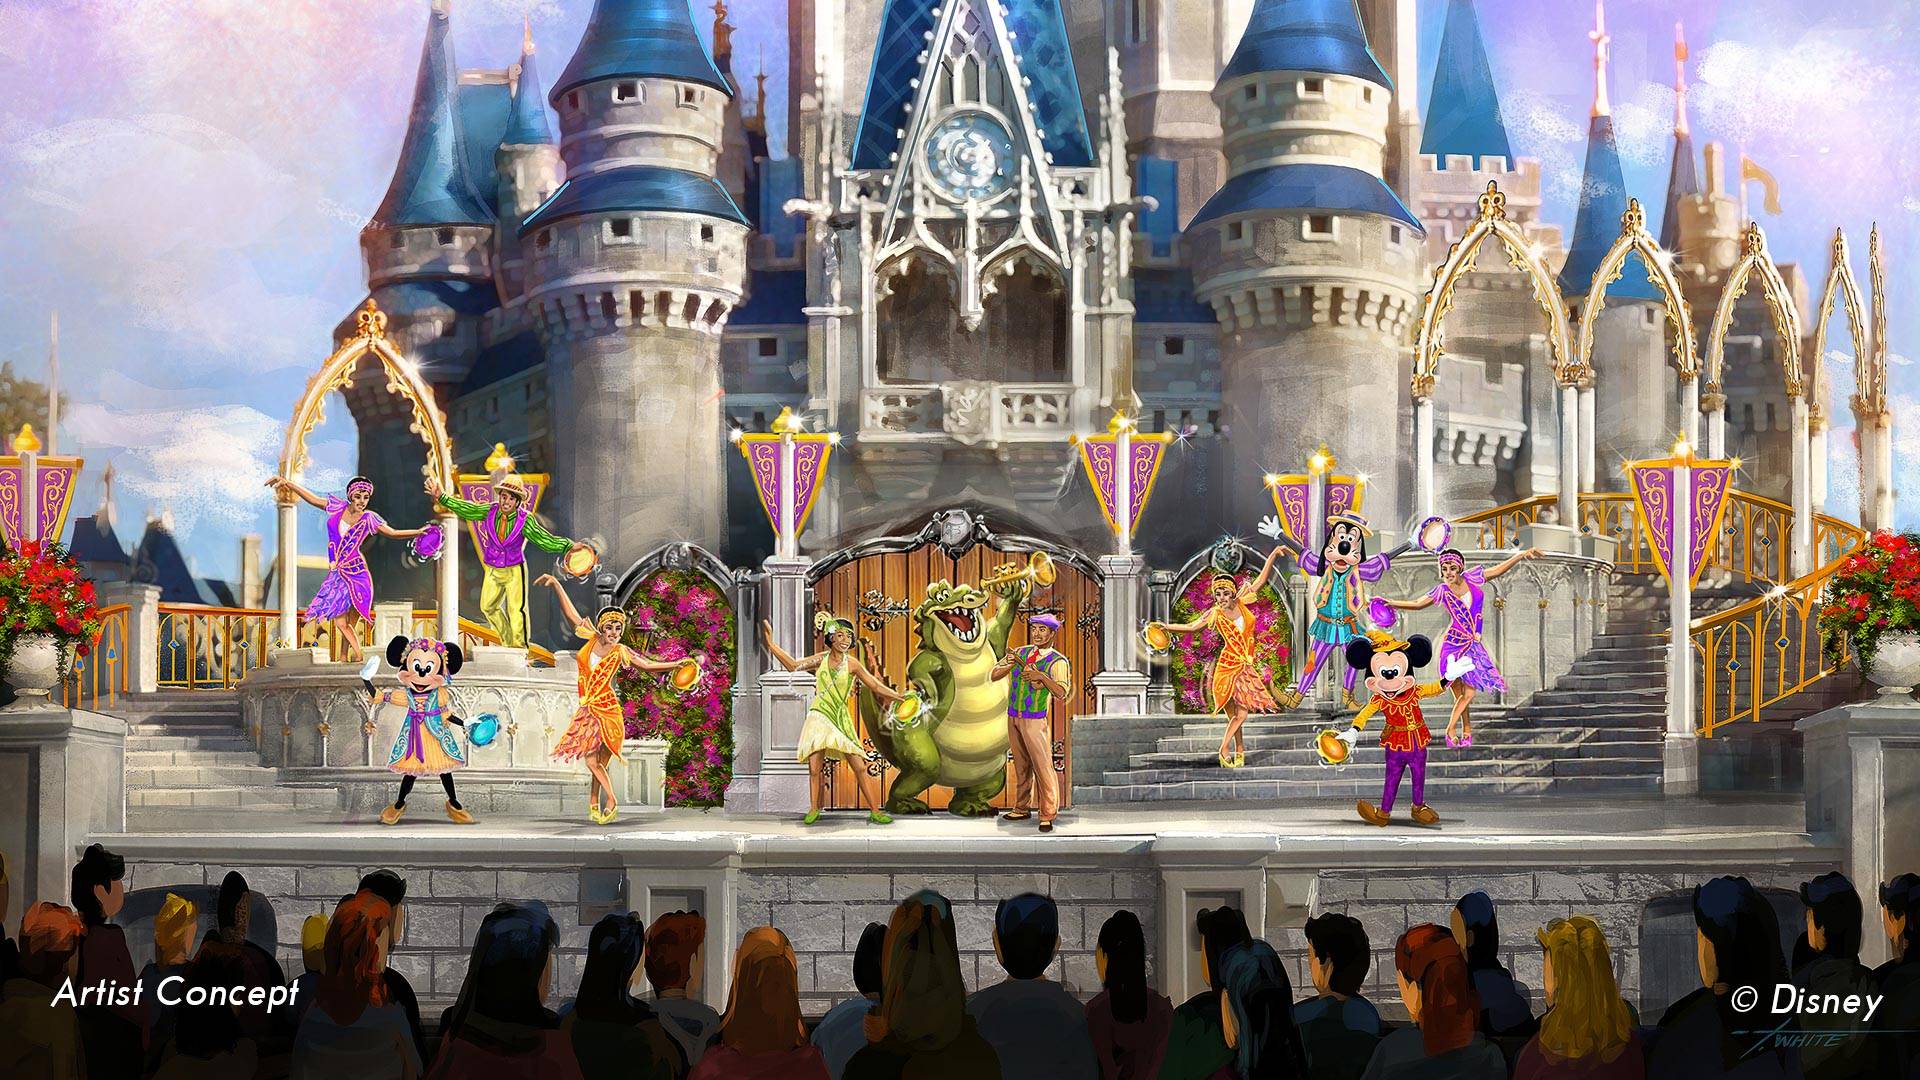 VIDEO - Special Holiday edition of Mickey's Royal Friendship Faire debuts at the Magic Kingdom